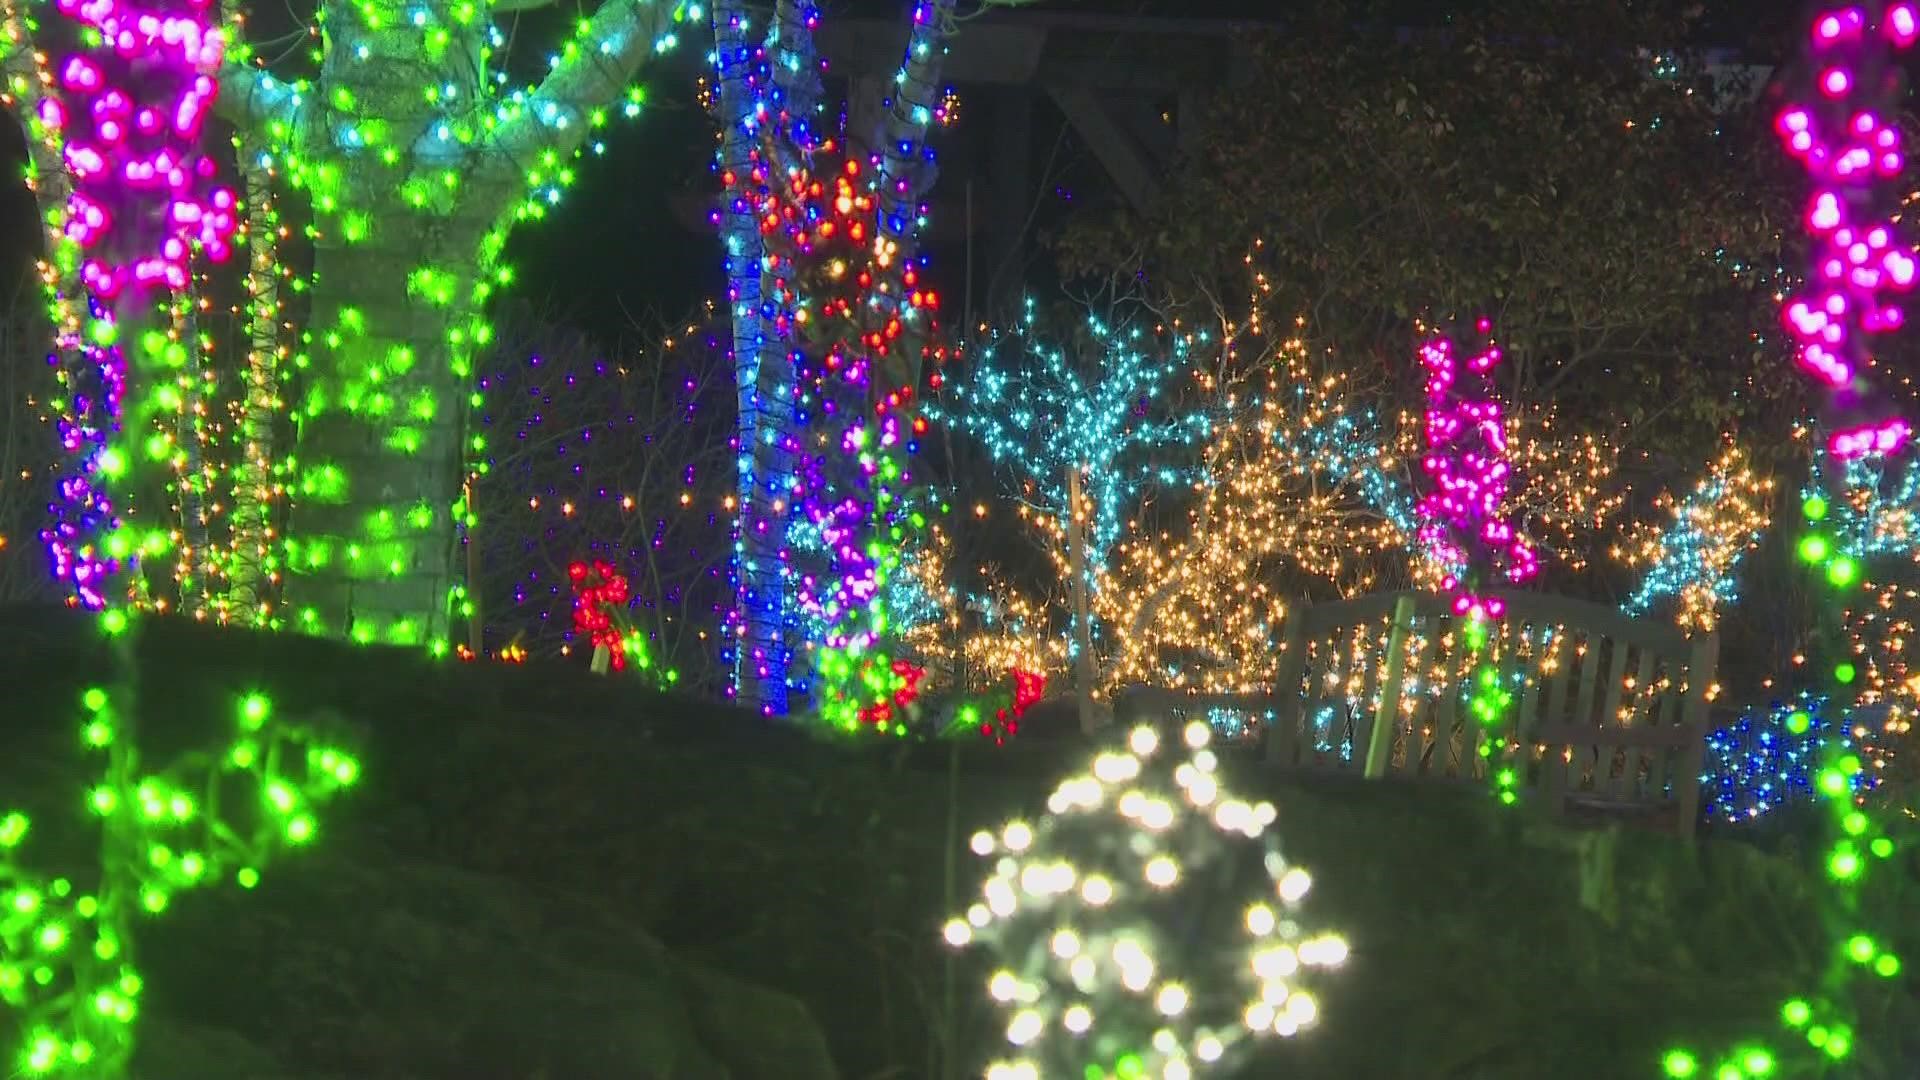 Coastal Maine Botanical Gardens is expecting more than 120,000 guests to attend this season's show.